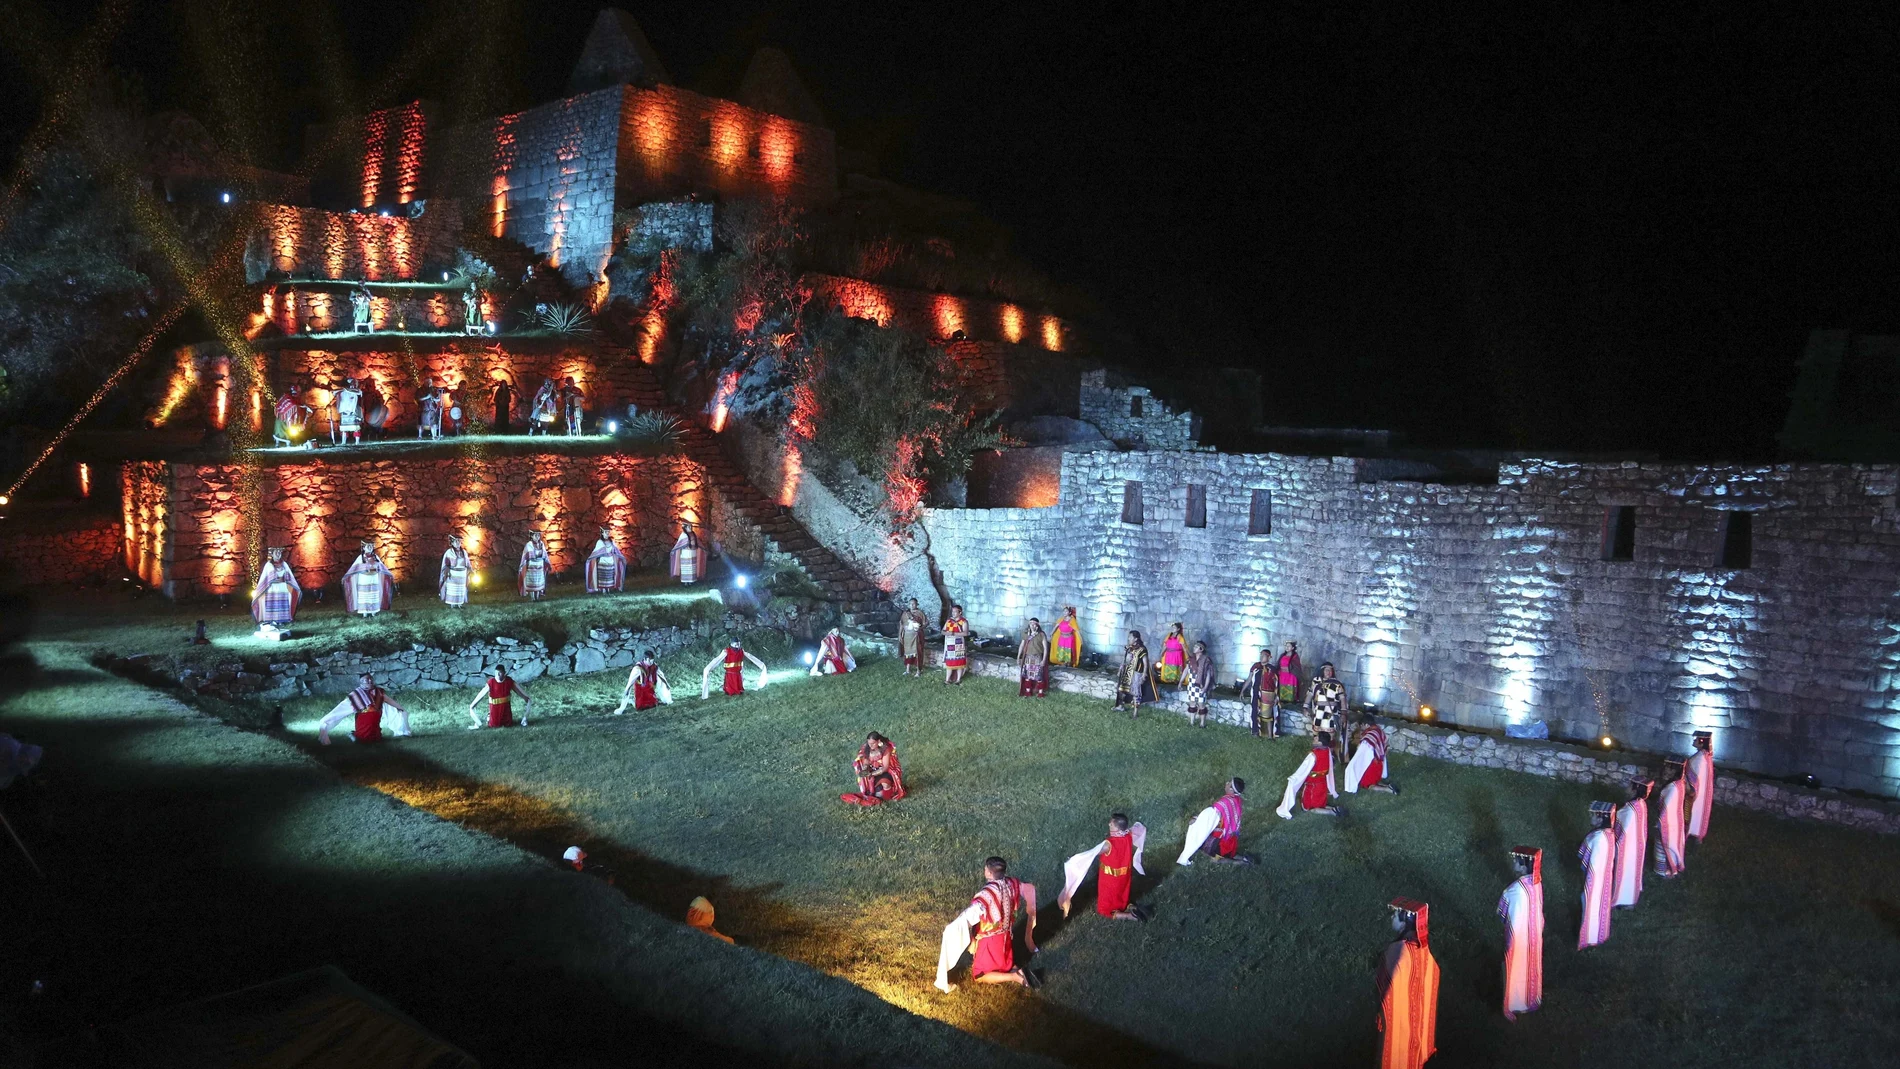 Artist Perform during a ceremony for the world-renowned Incan citadel of Machu Picchu as it reopens for the first time since its 8-months-long closure to help curb the spread of COVID-19, in the department of Cusco, Peru, Sunday, Nov. 1, 2020. (AP Photo/Martin Mejia)